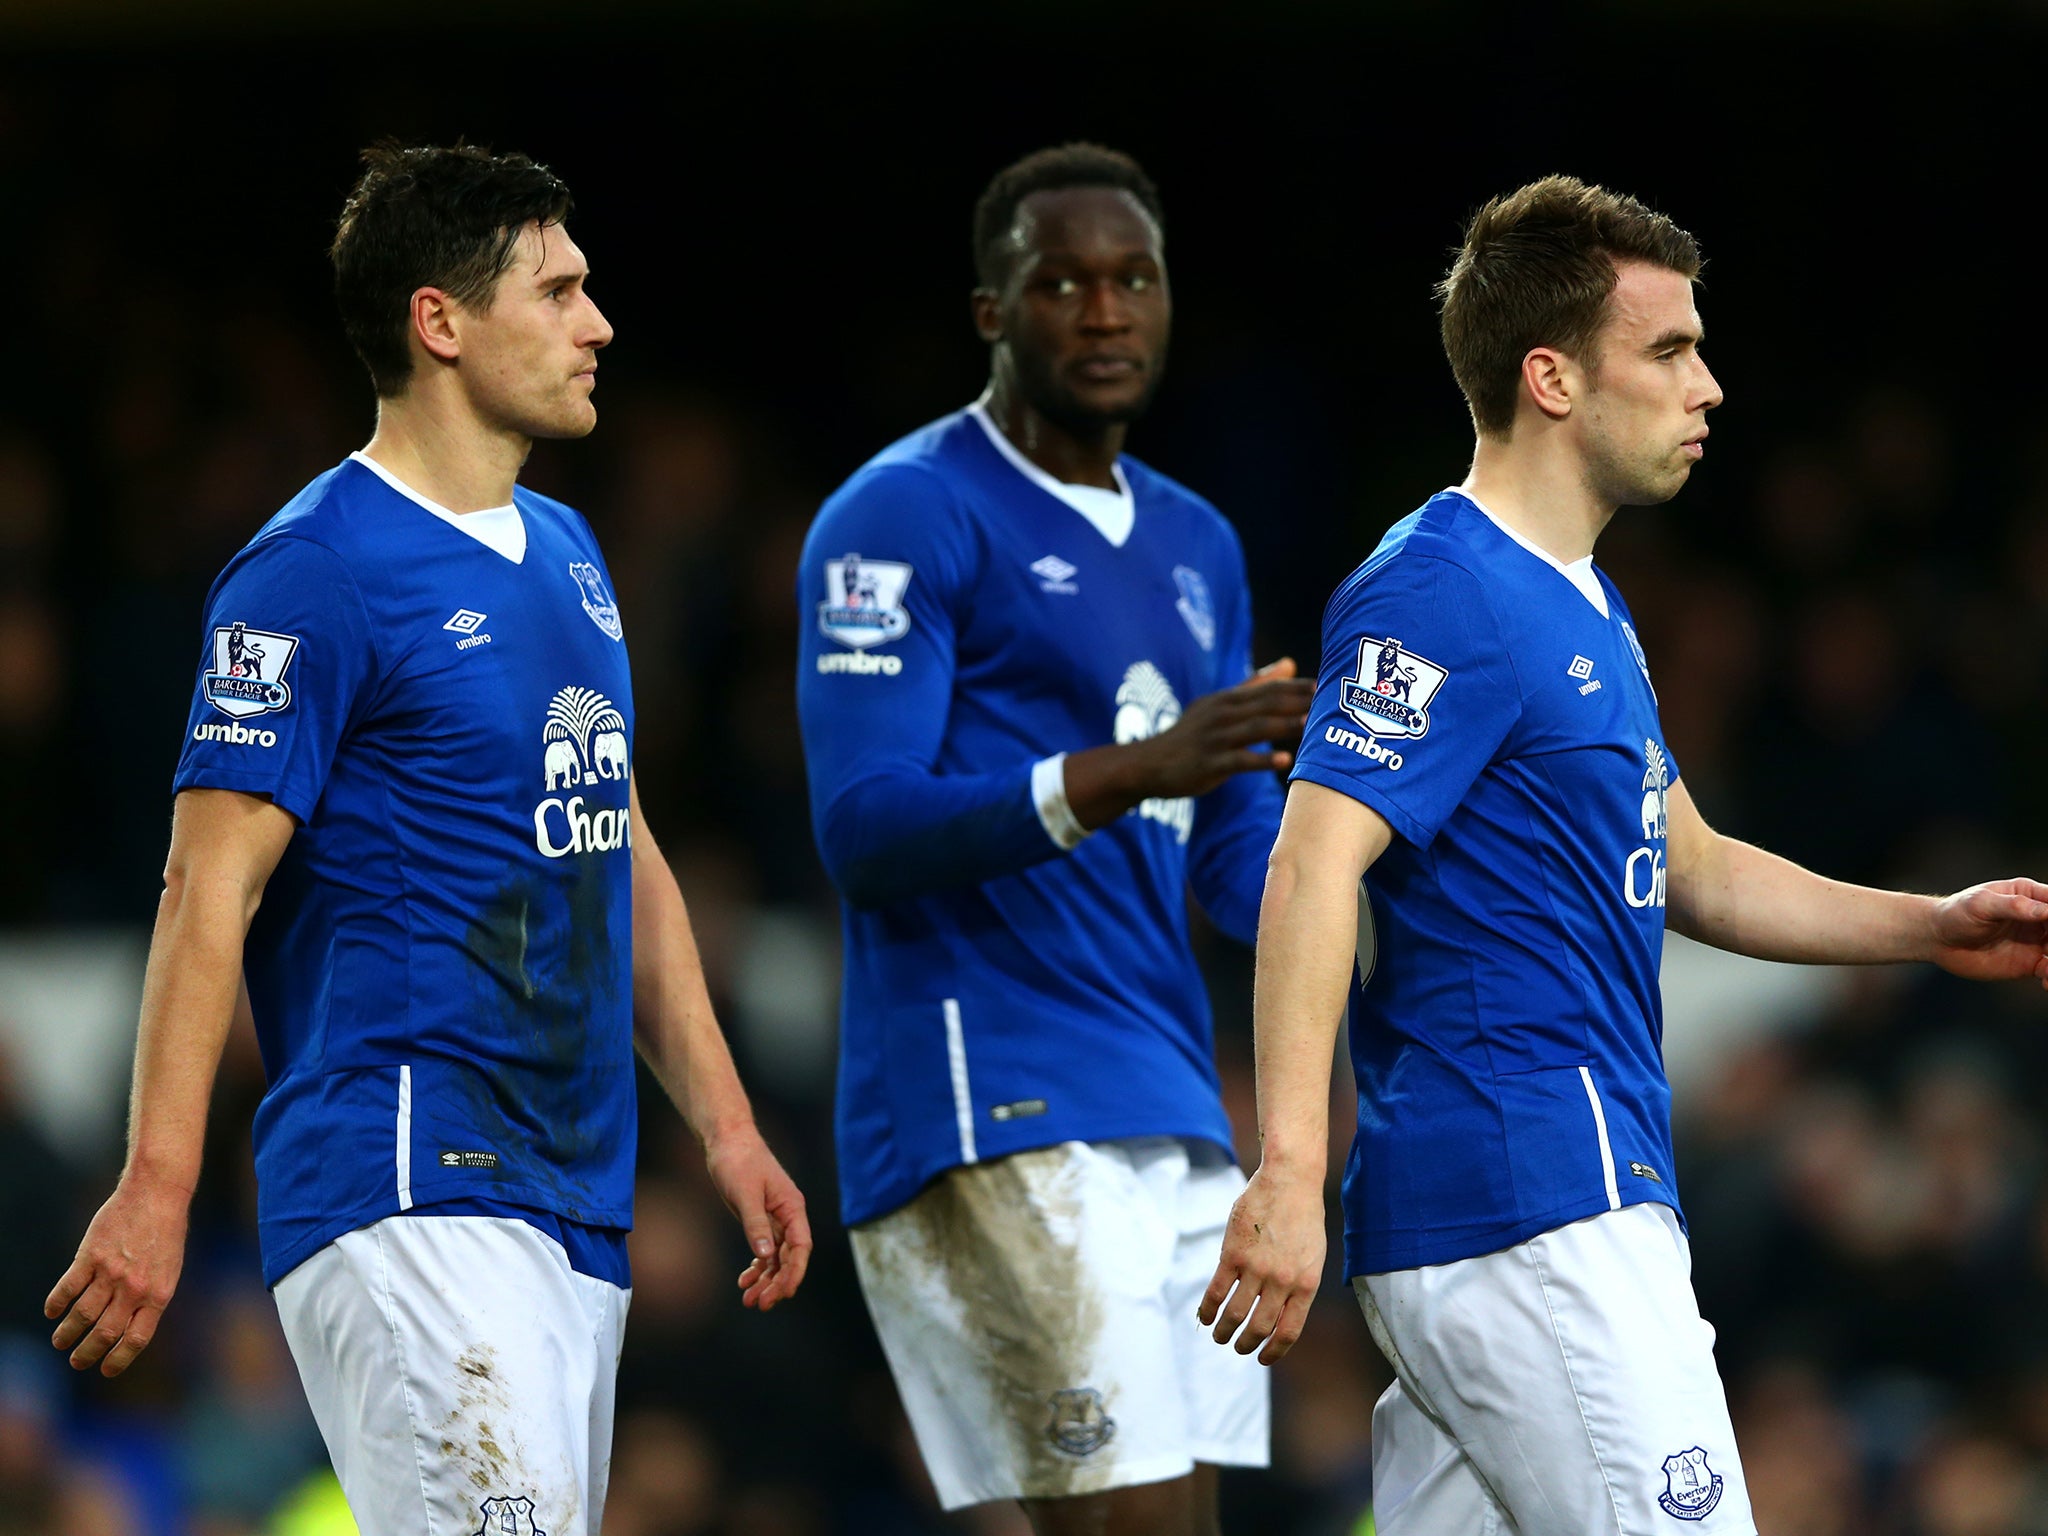 Everton's players look on dejected after their 2-1 defeat